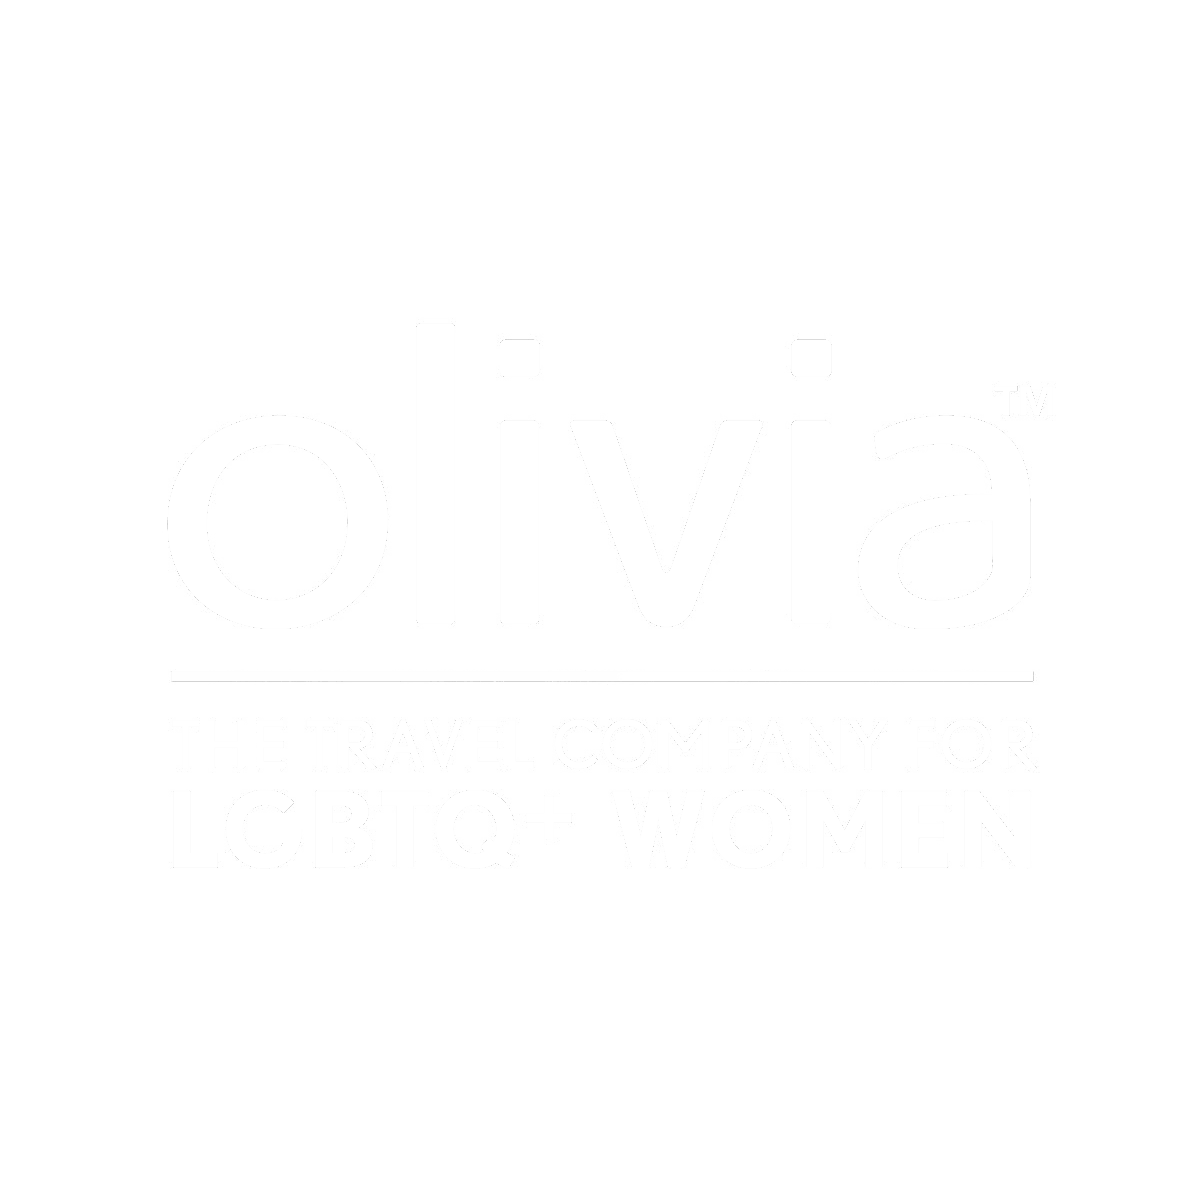 The text "Olivia(TM) the Travel Company for LGBTQ+ Women"